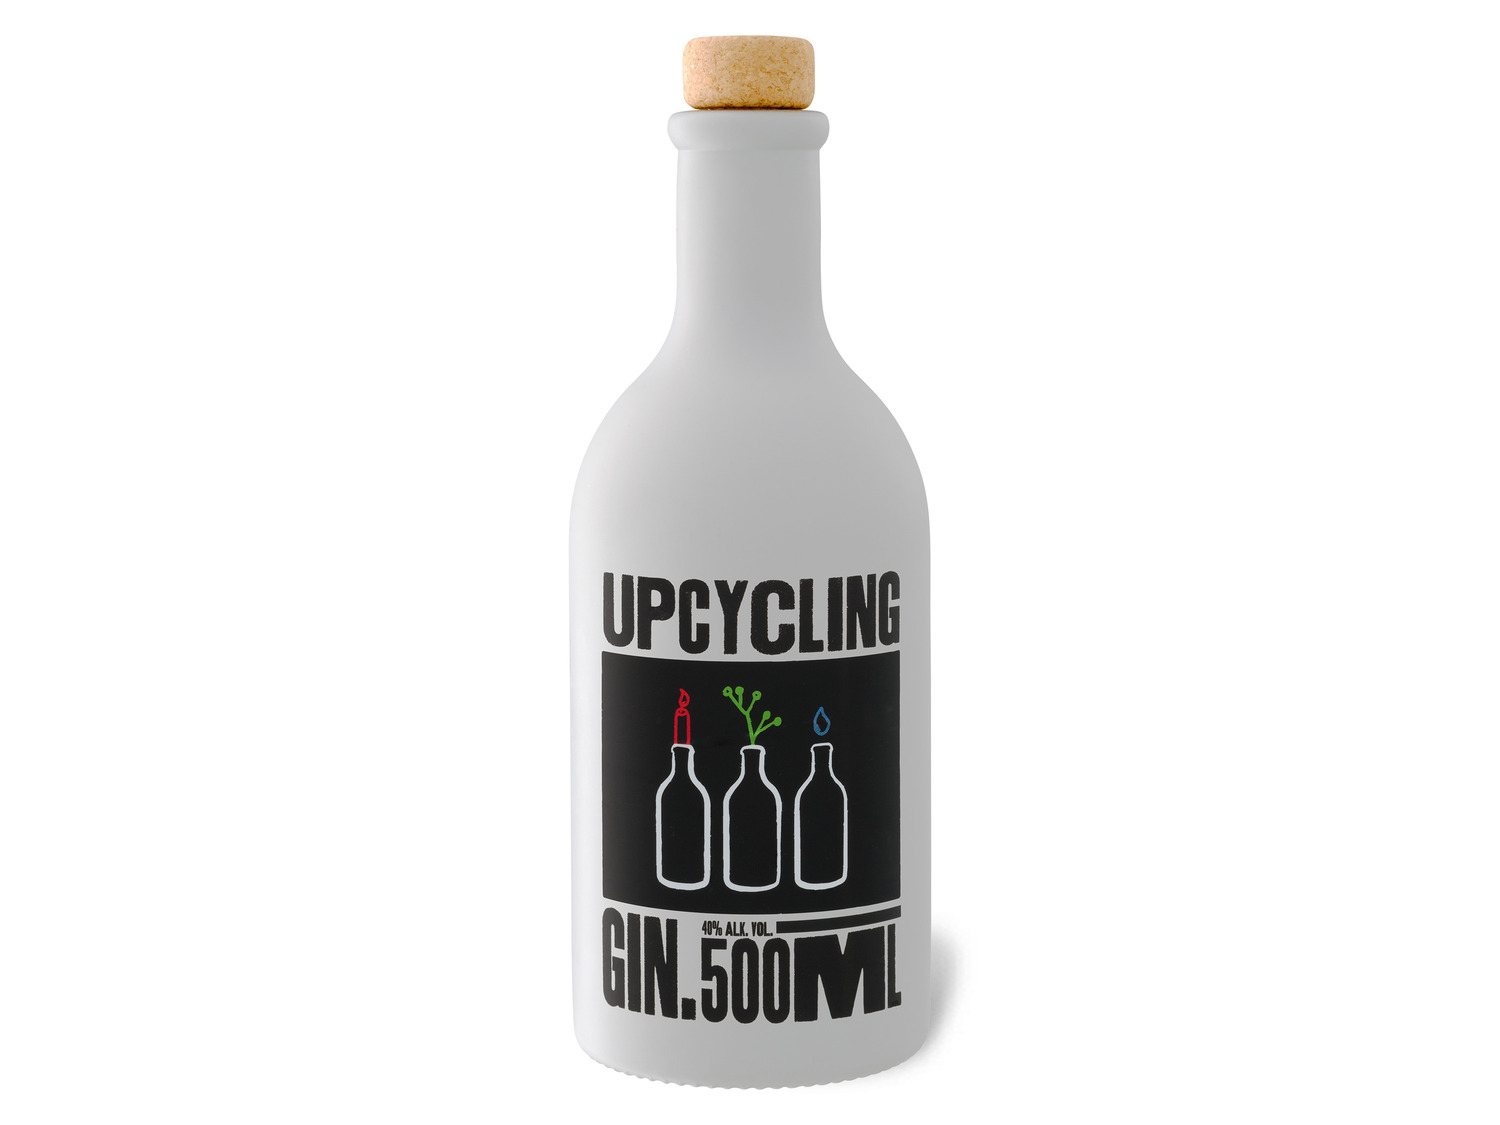 Upcycling Gin 40% kaufen Vol online LIDL 